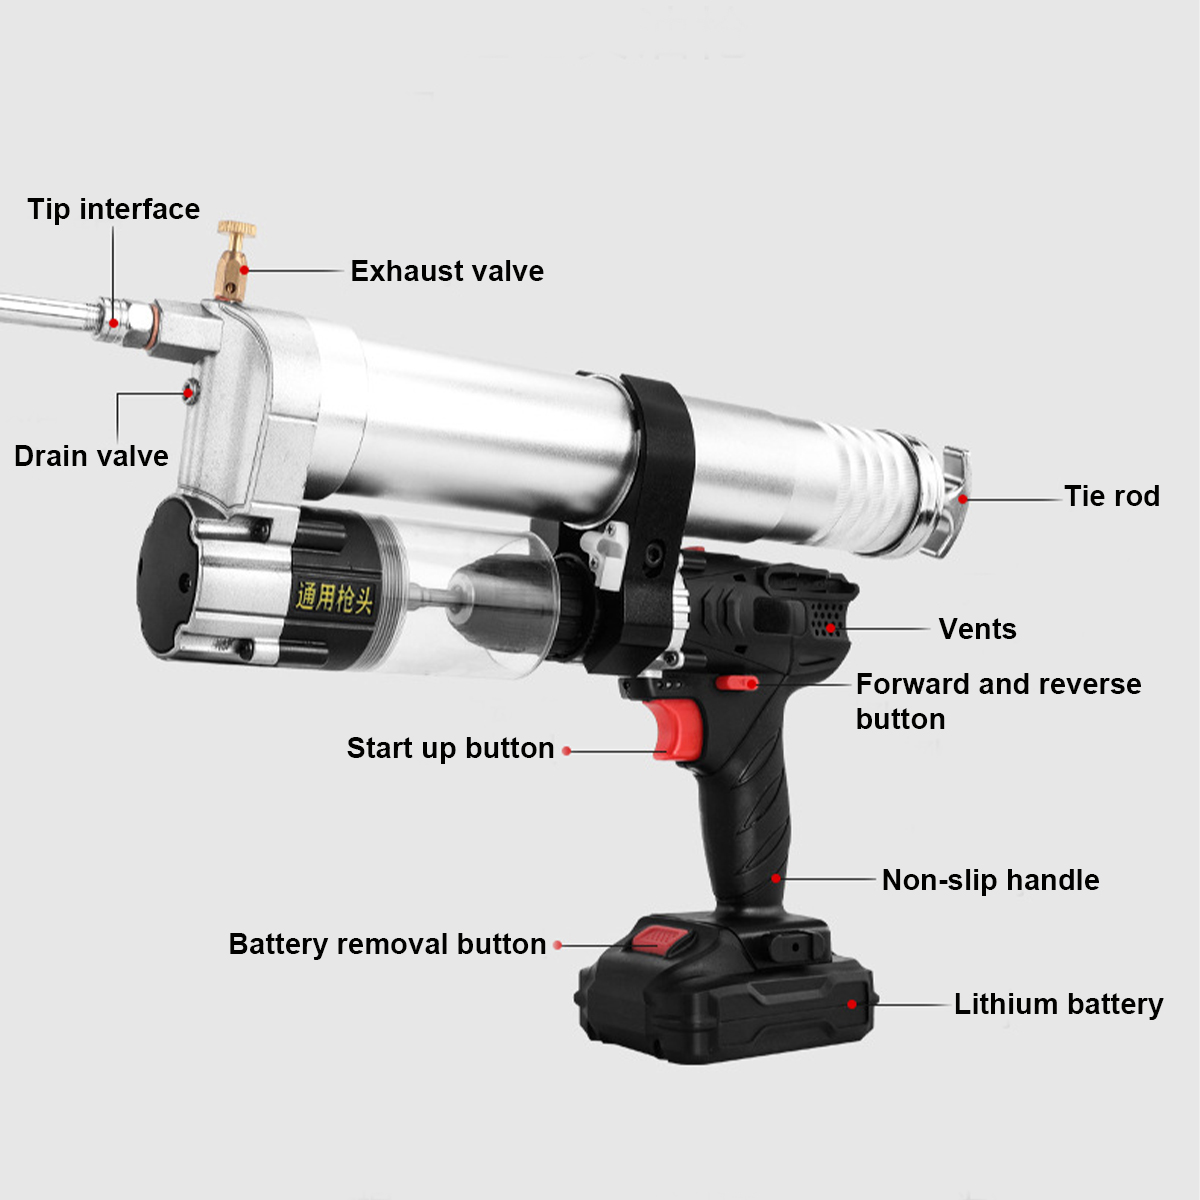 21V-Electric-Grease-Guns-W-Electric-Drill-High-Pressure-Butter-Portable-Excavator-Refueling-Tool-W-1-1851027-9